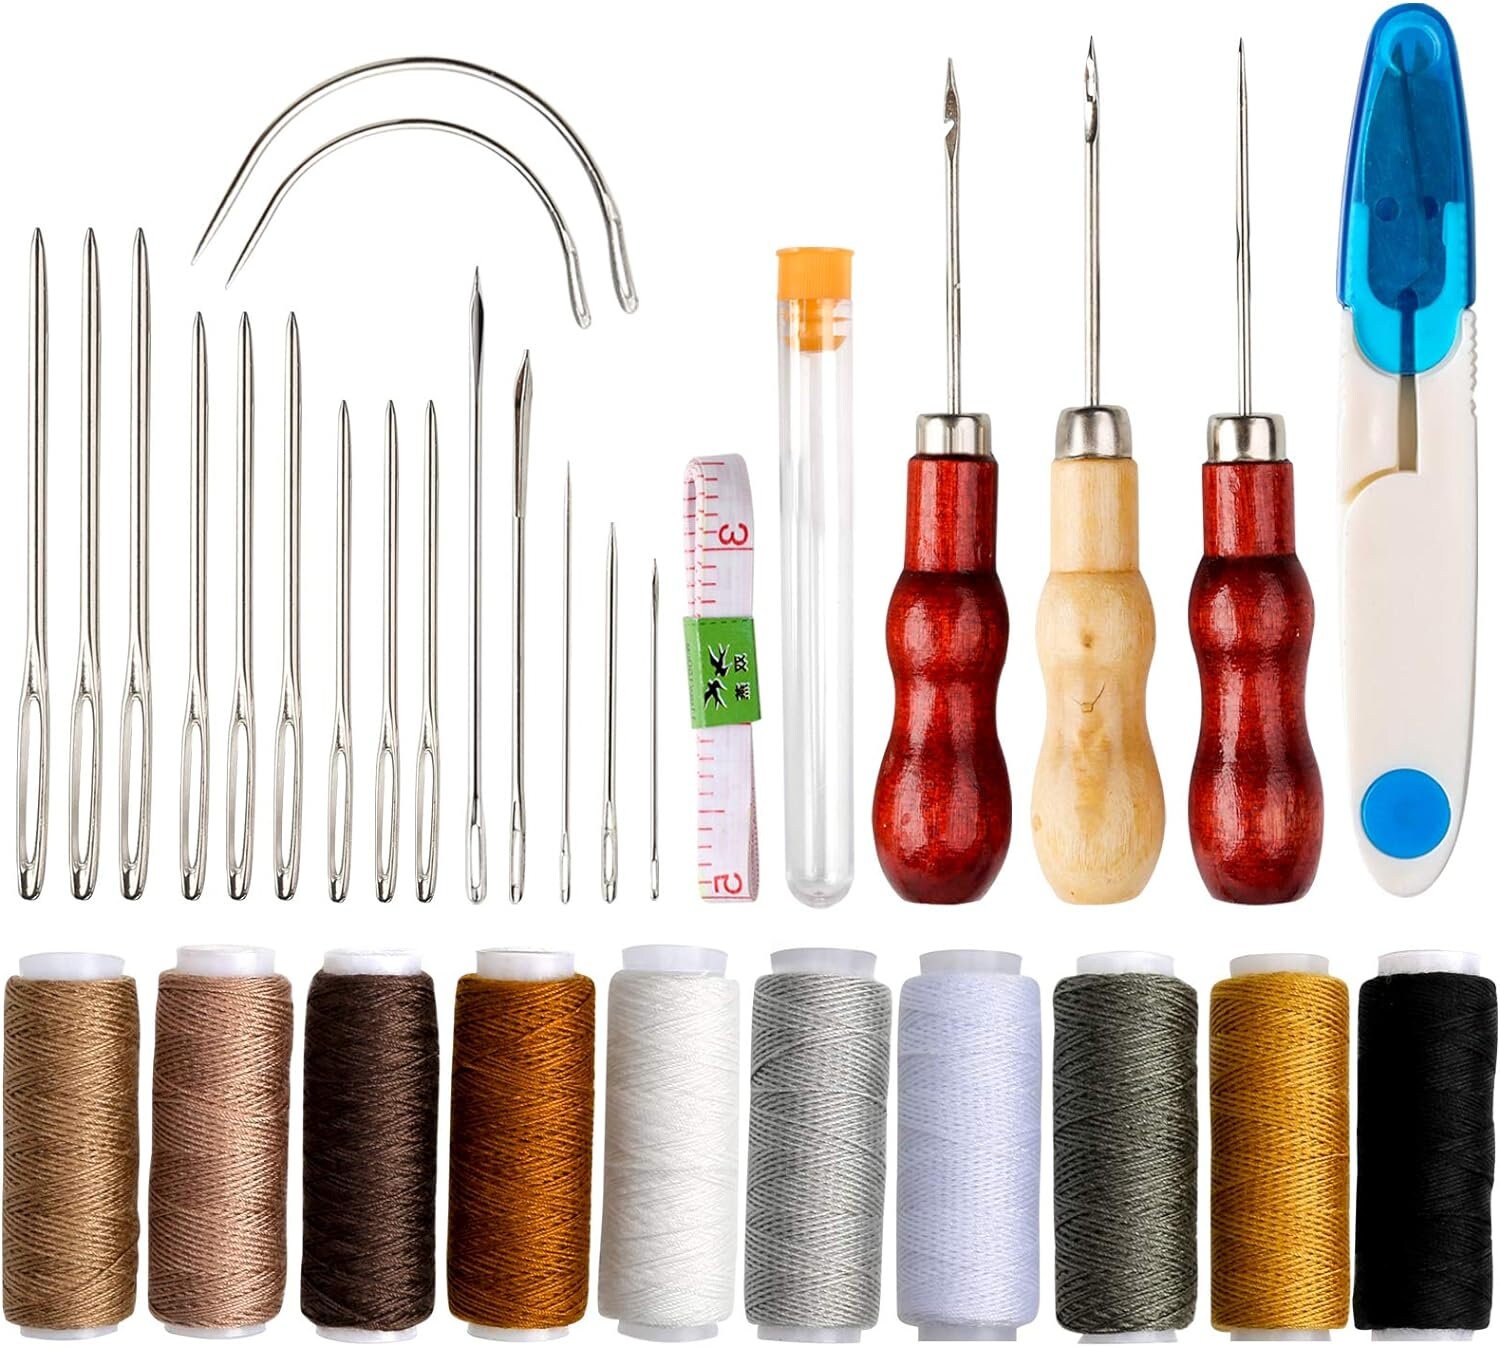 28 Piece Leather Sewing Kit, Leather Work Kit With Big Eye Sewing Needles,  Waxing Thread, Leather Upholstery Repair Kit 